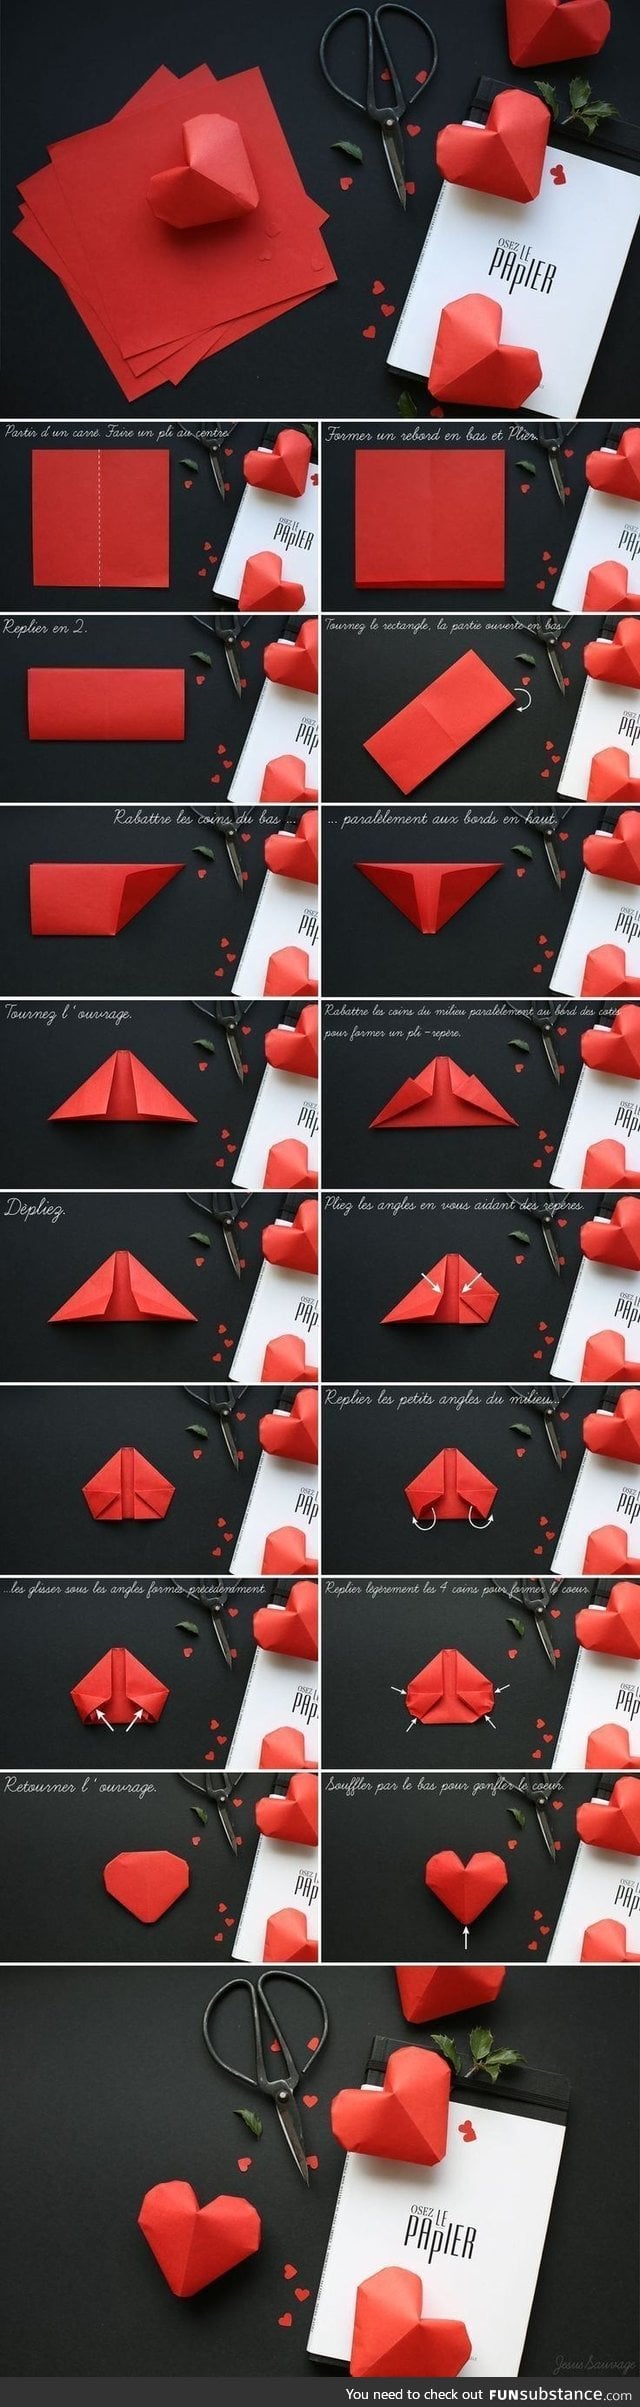 How to make a 3D heart origami